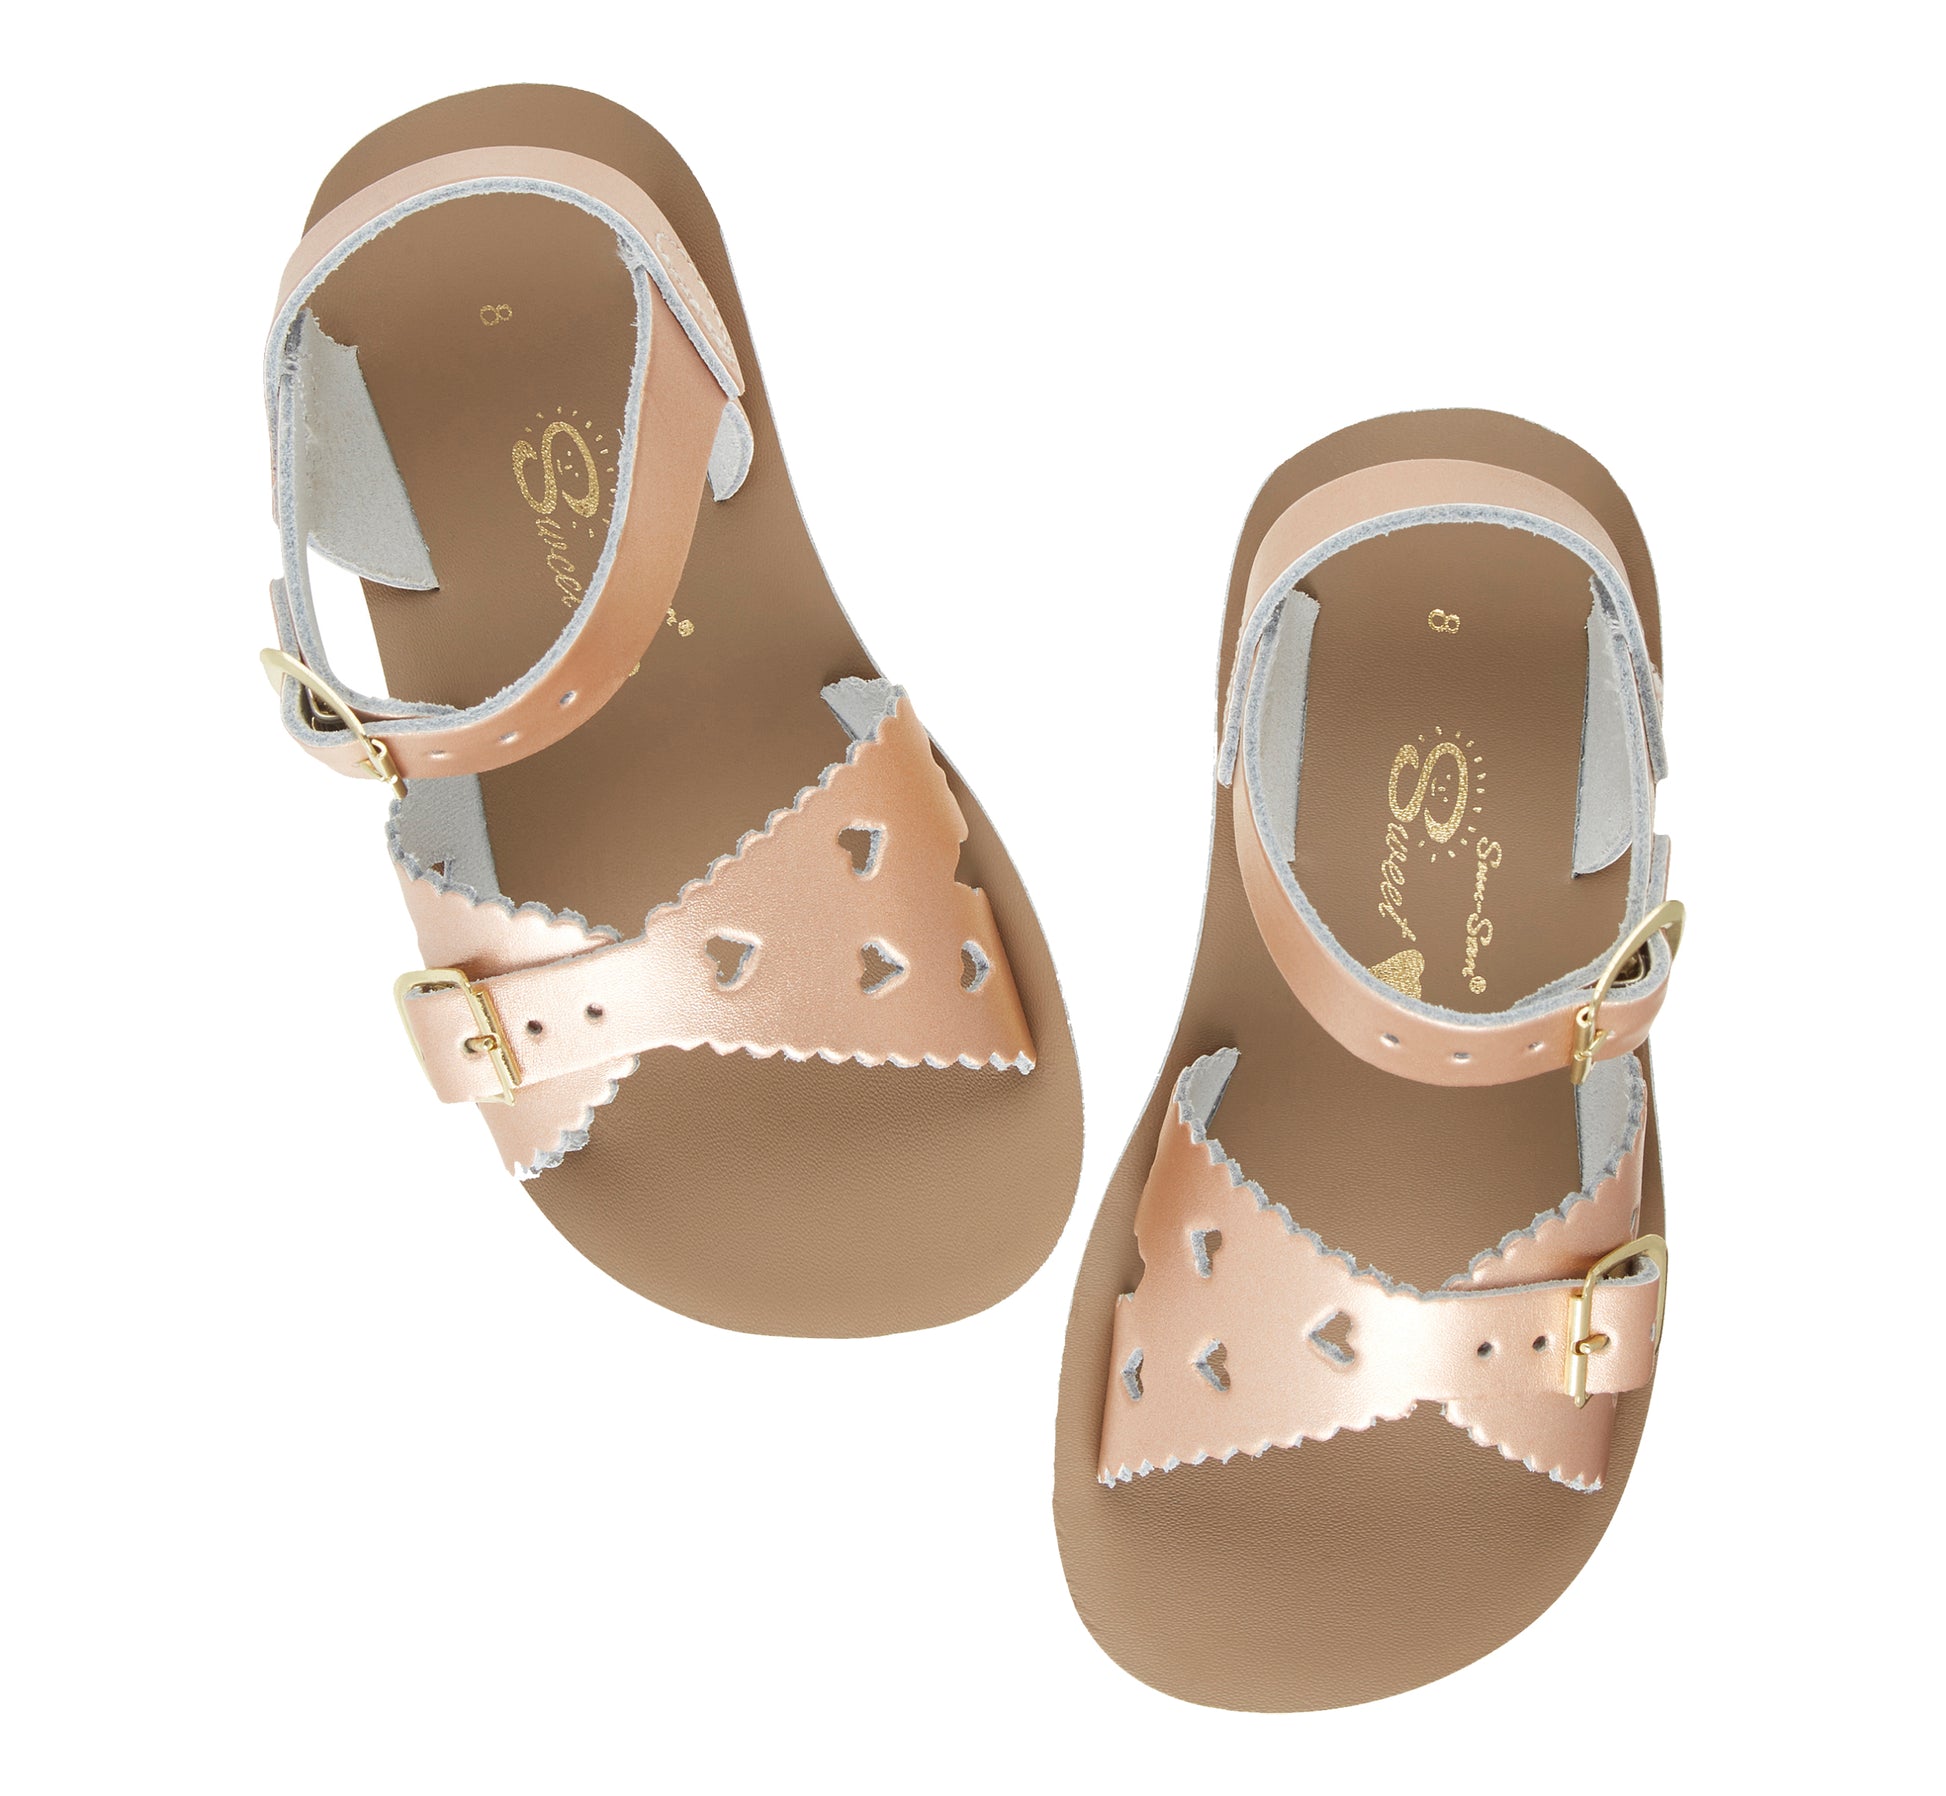 A girls sandal by Salt Water Sandal in rose gold with double buckle fastening across the instep and around the ankle. Featuring scallop edge and punched out heart detail. Top view.